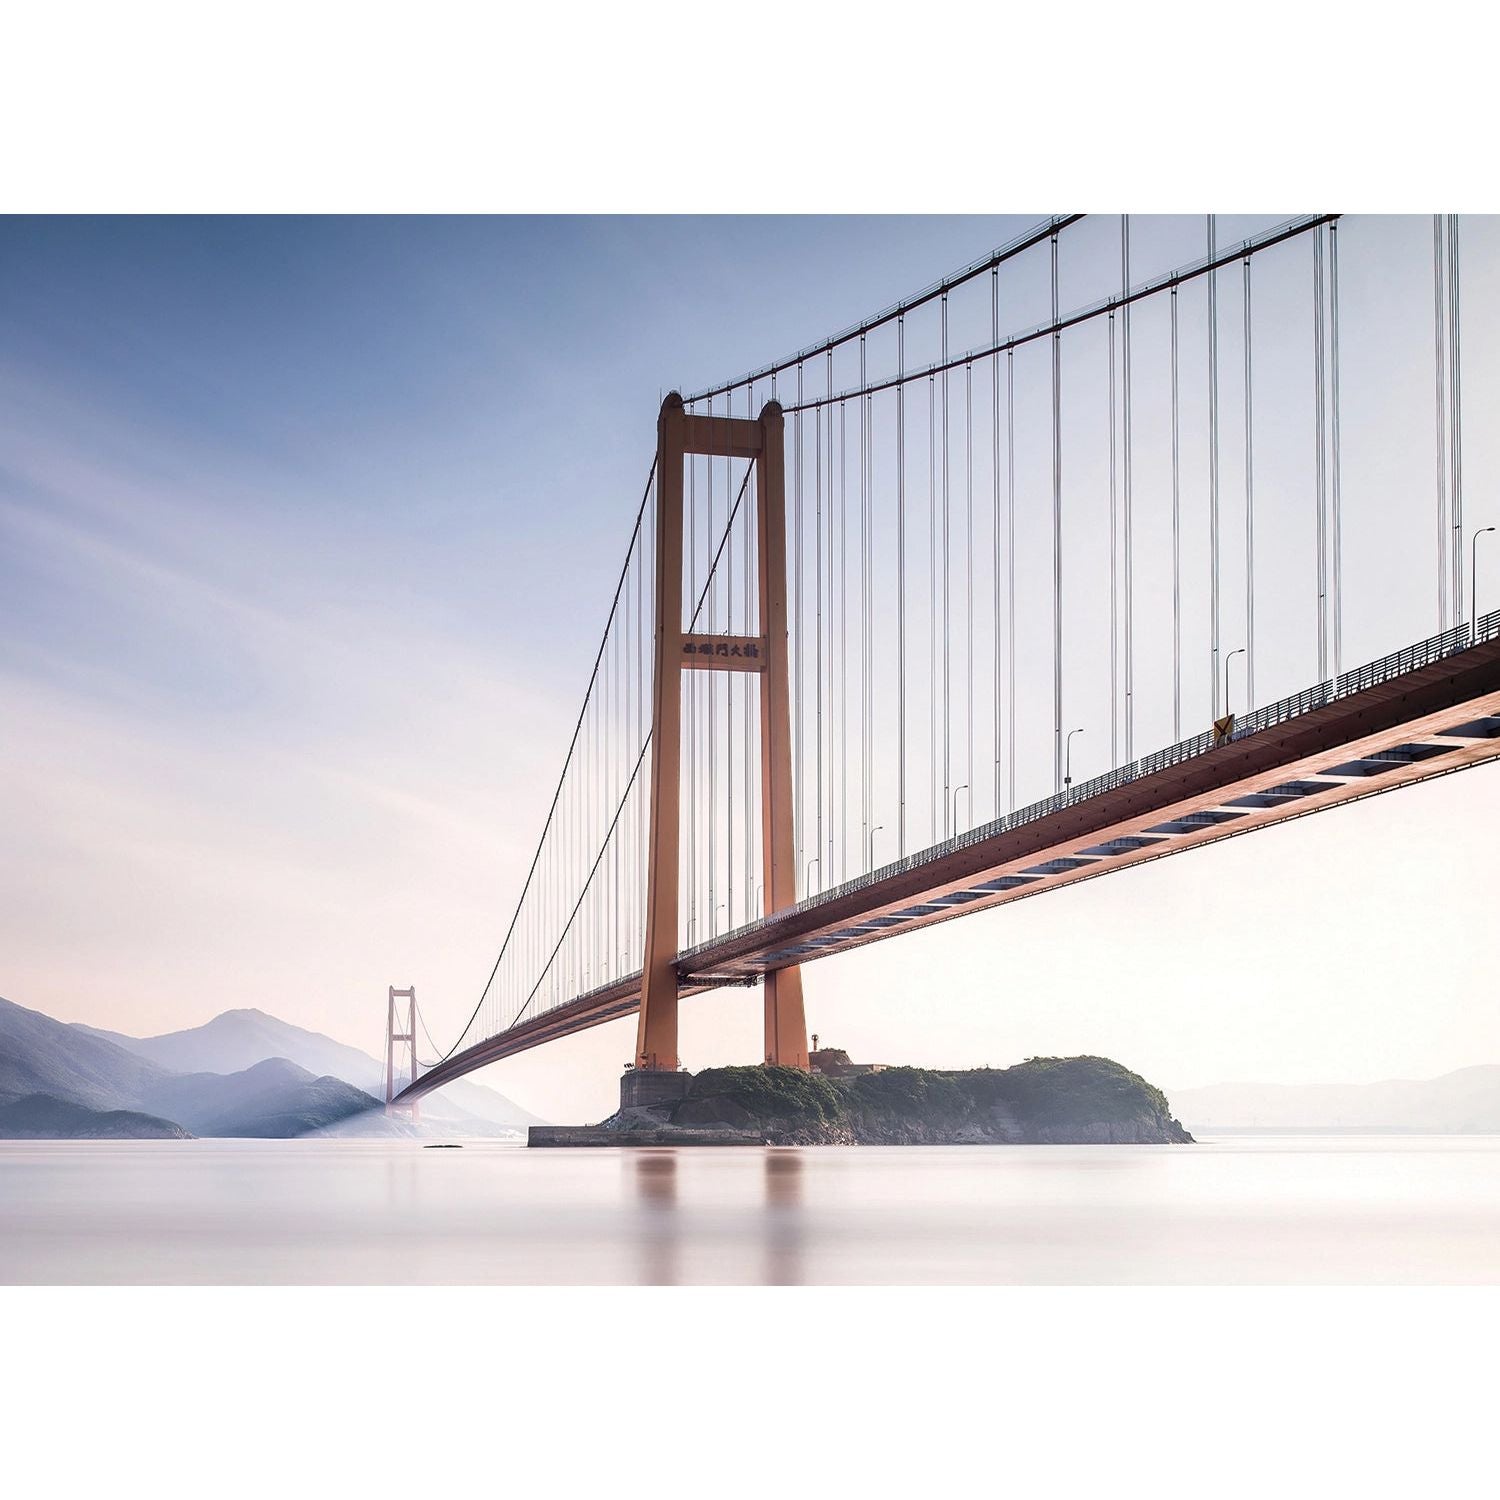 Overpass Oasis: Wall Mural of a Majestic Bridge Over Clear Waters